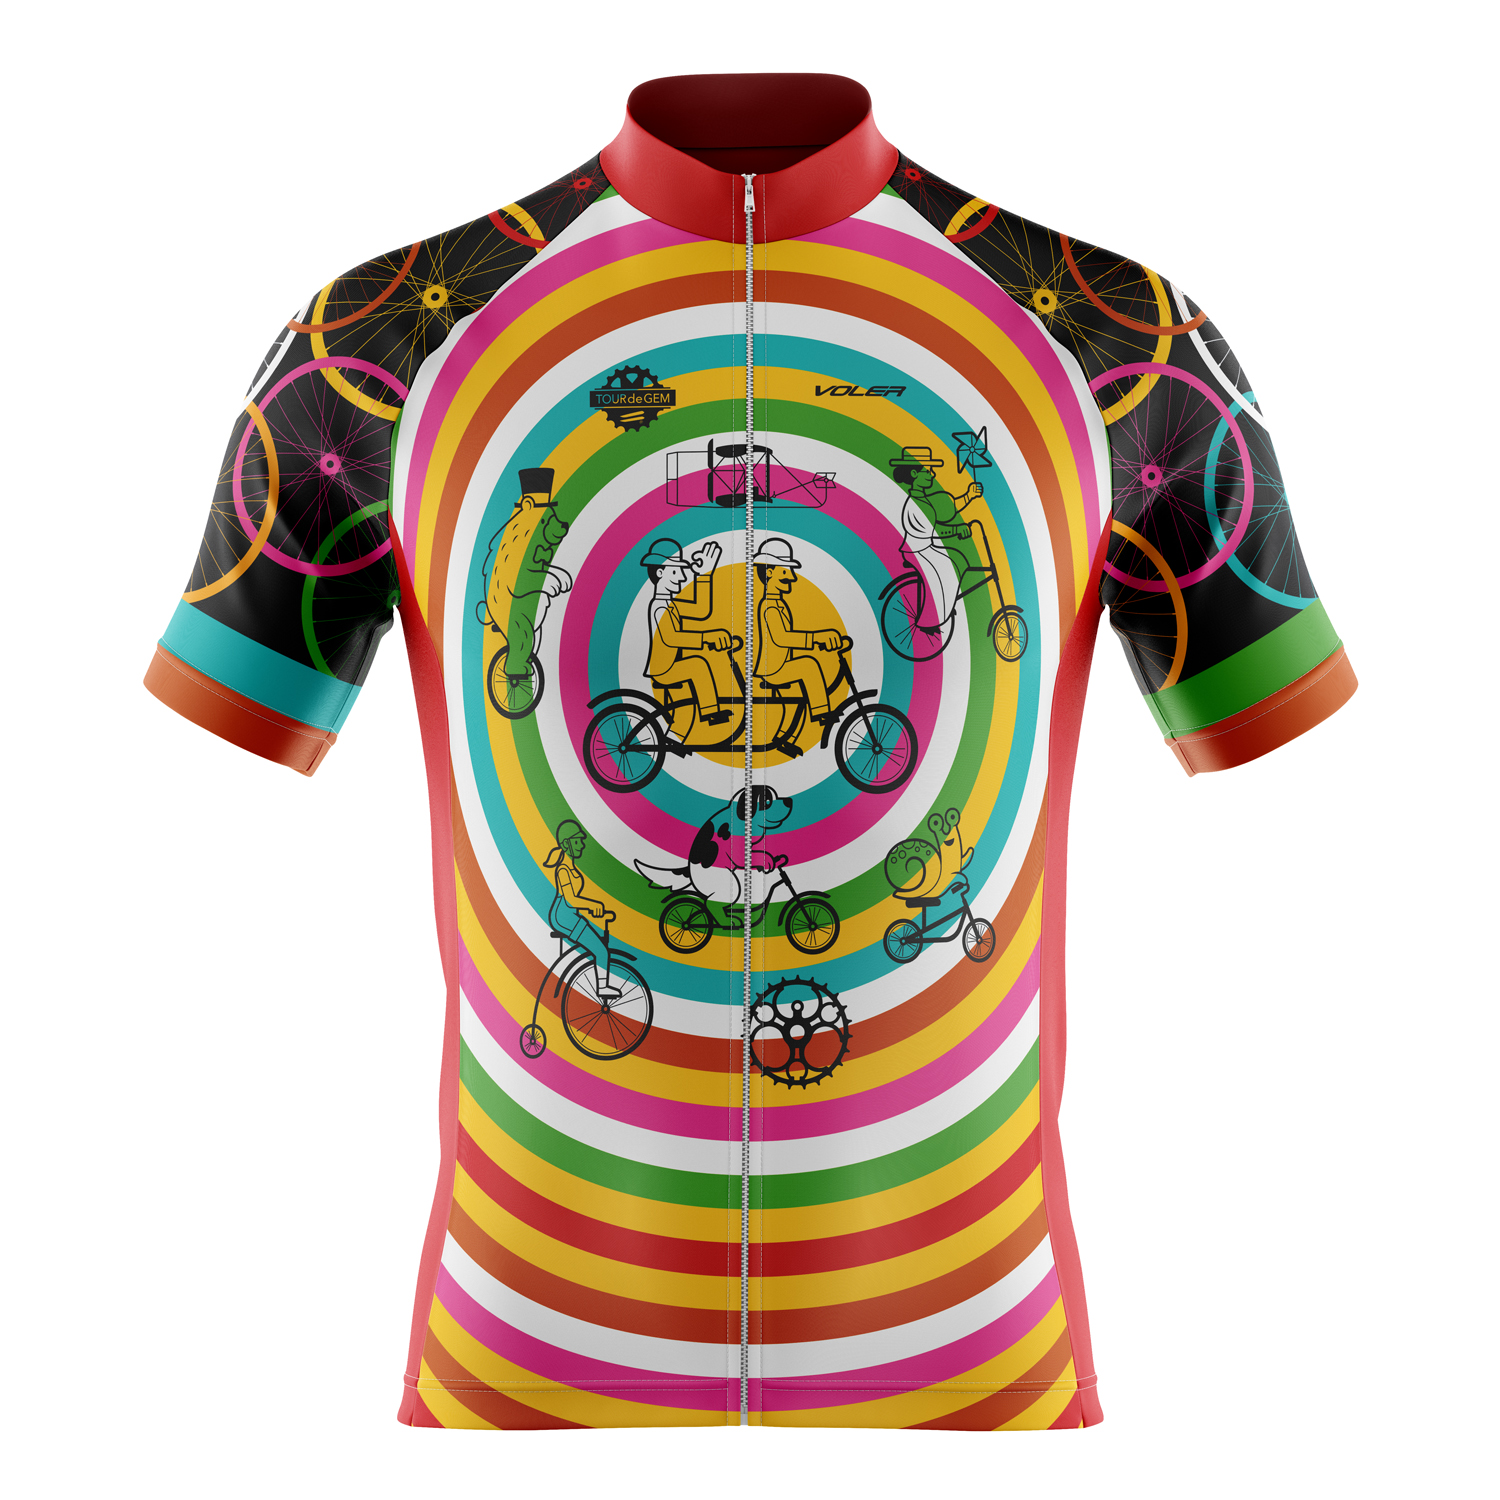 Adult Small Men's jersey